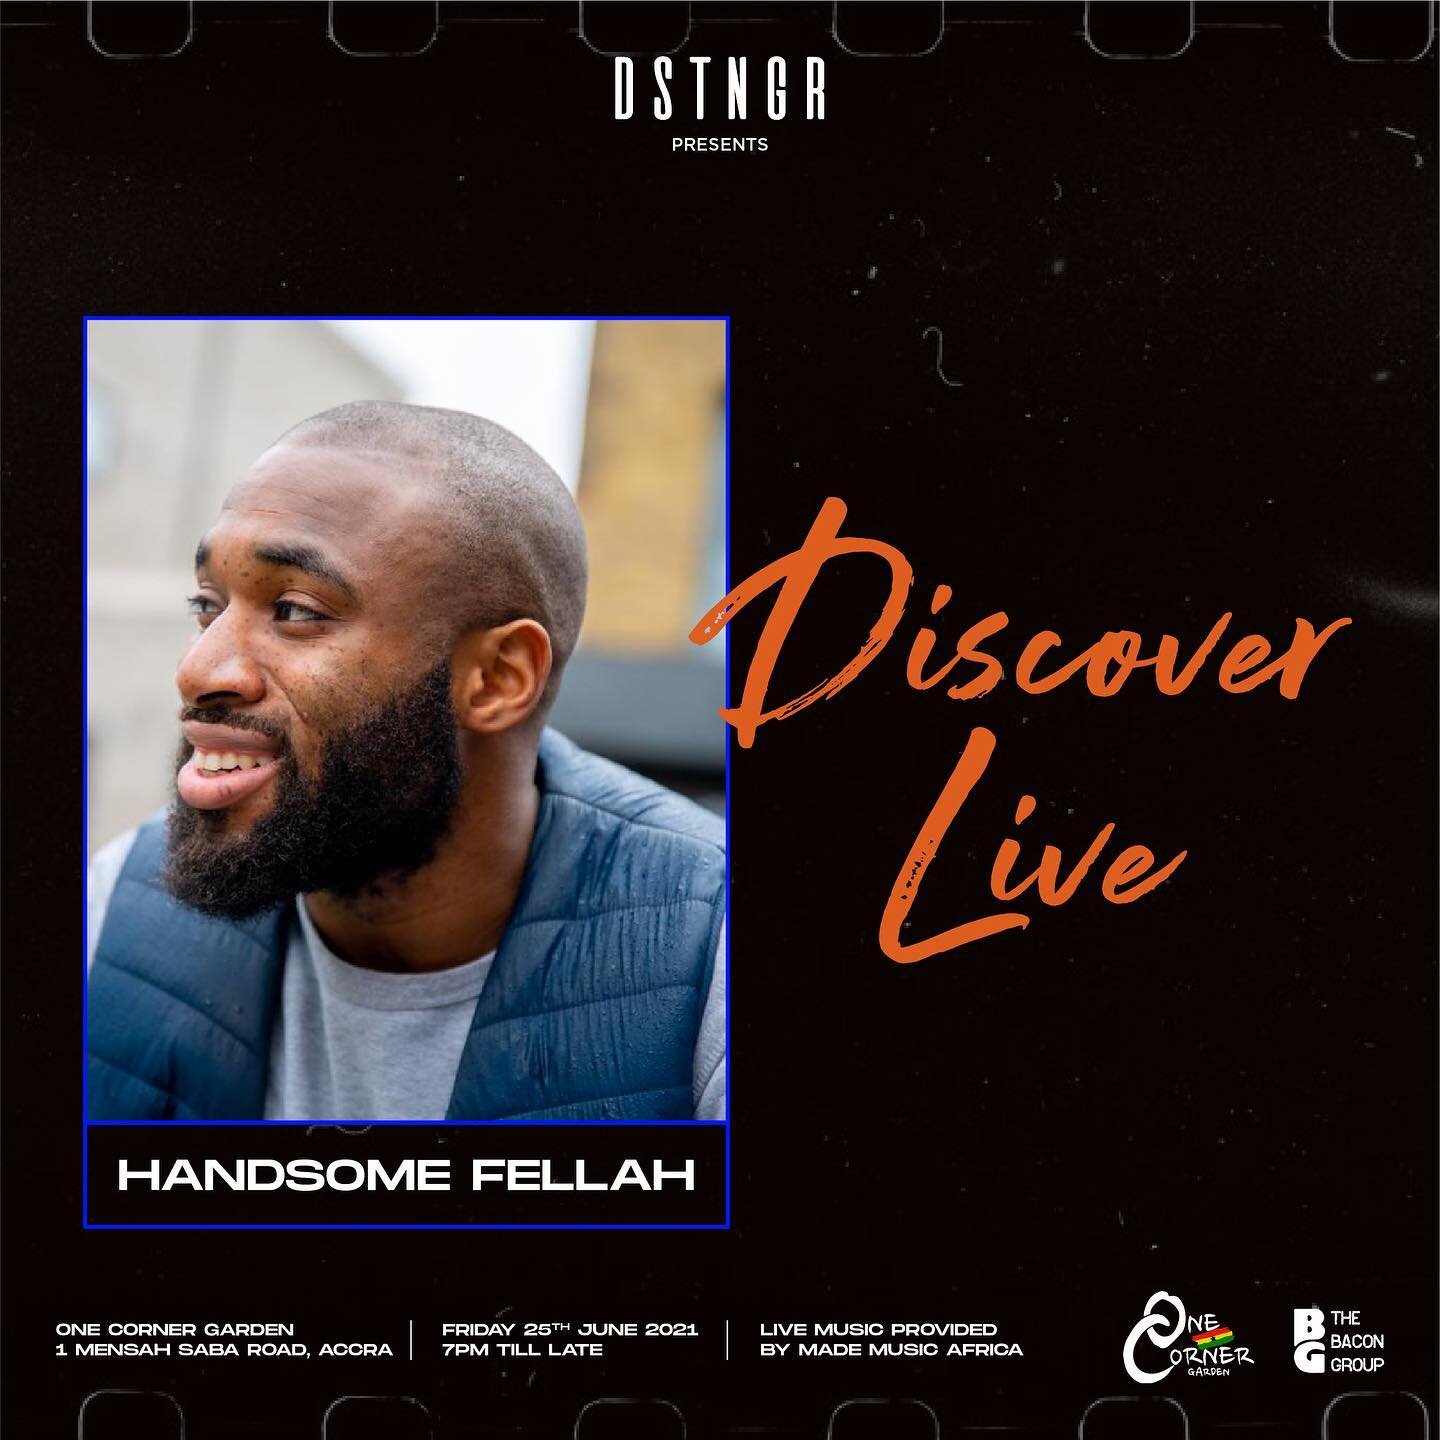 TONIGHT! @handsomefellah will be holding the tunes down on the 1&rsquo;s + 2s for &lsquo;DISCOVER LIVE&rsquo; at @onecornergh!

FREE ENTRY! Doors open at 7PM! 
 
And of course&hellip; after the show, is the official AFTER PARTY! Happening down at @th